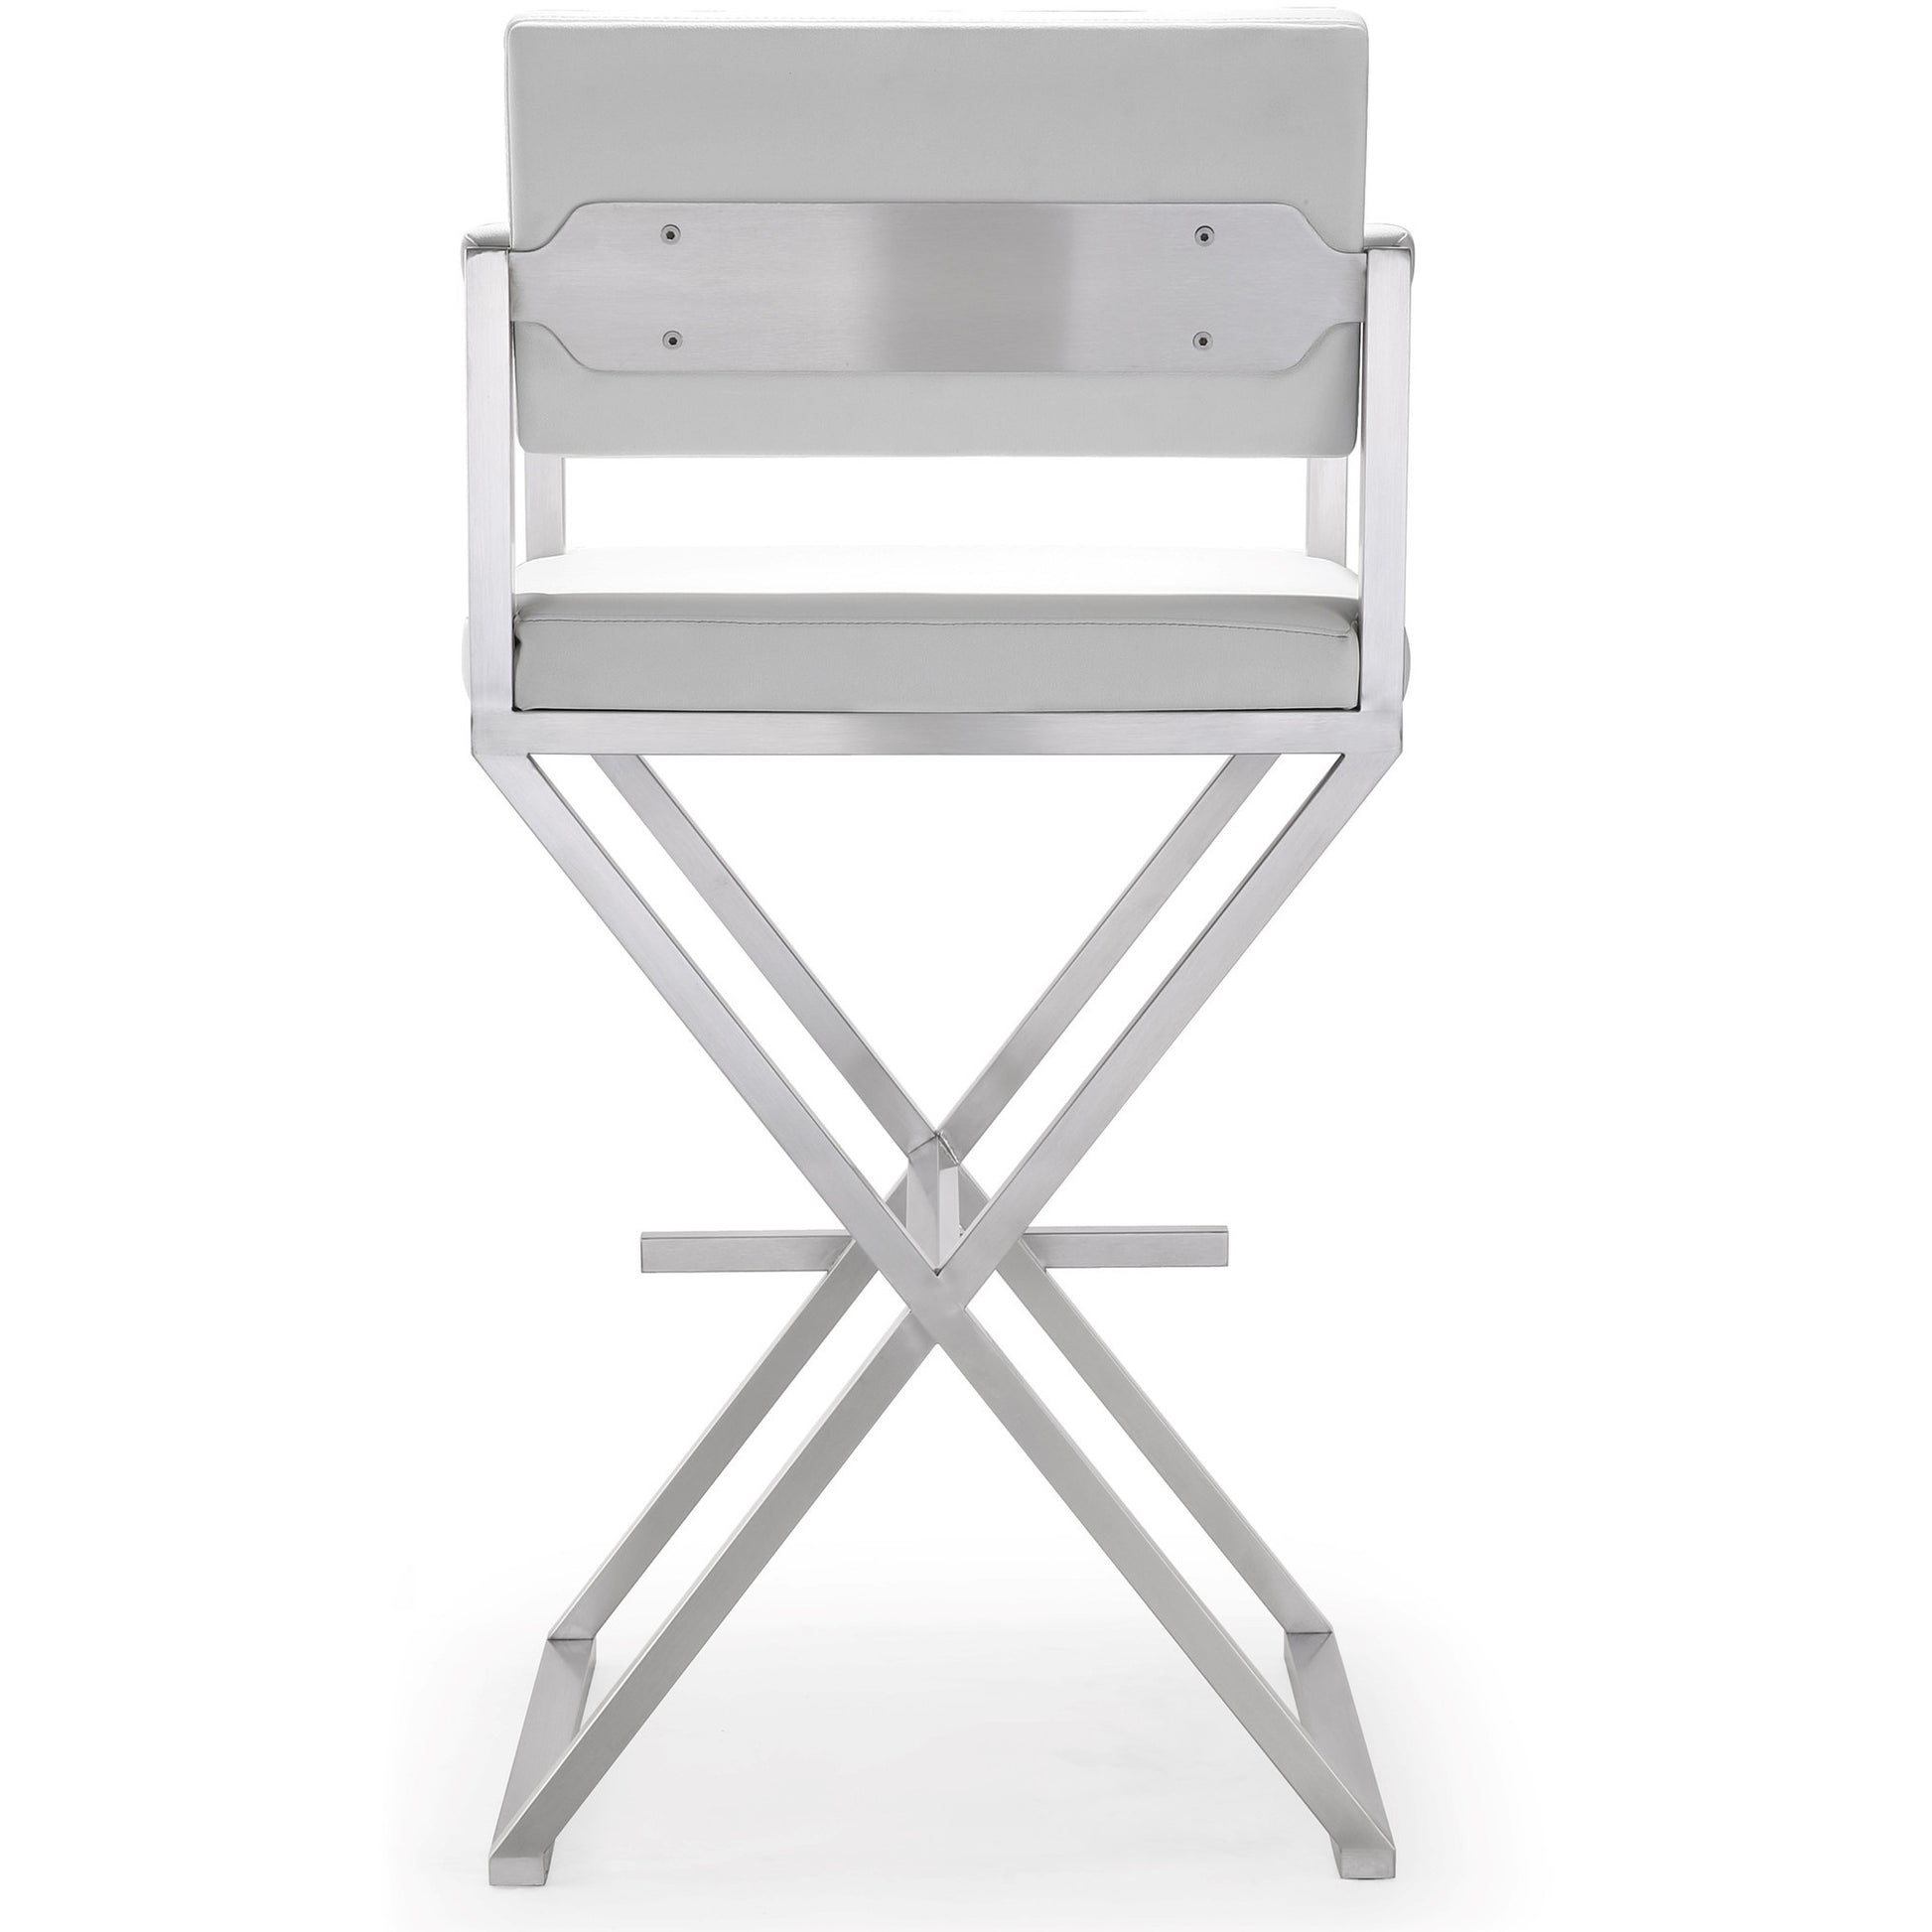 Director White Stainless Steel Barstool - living-essentials